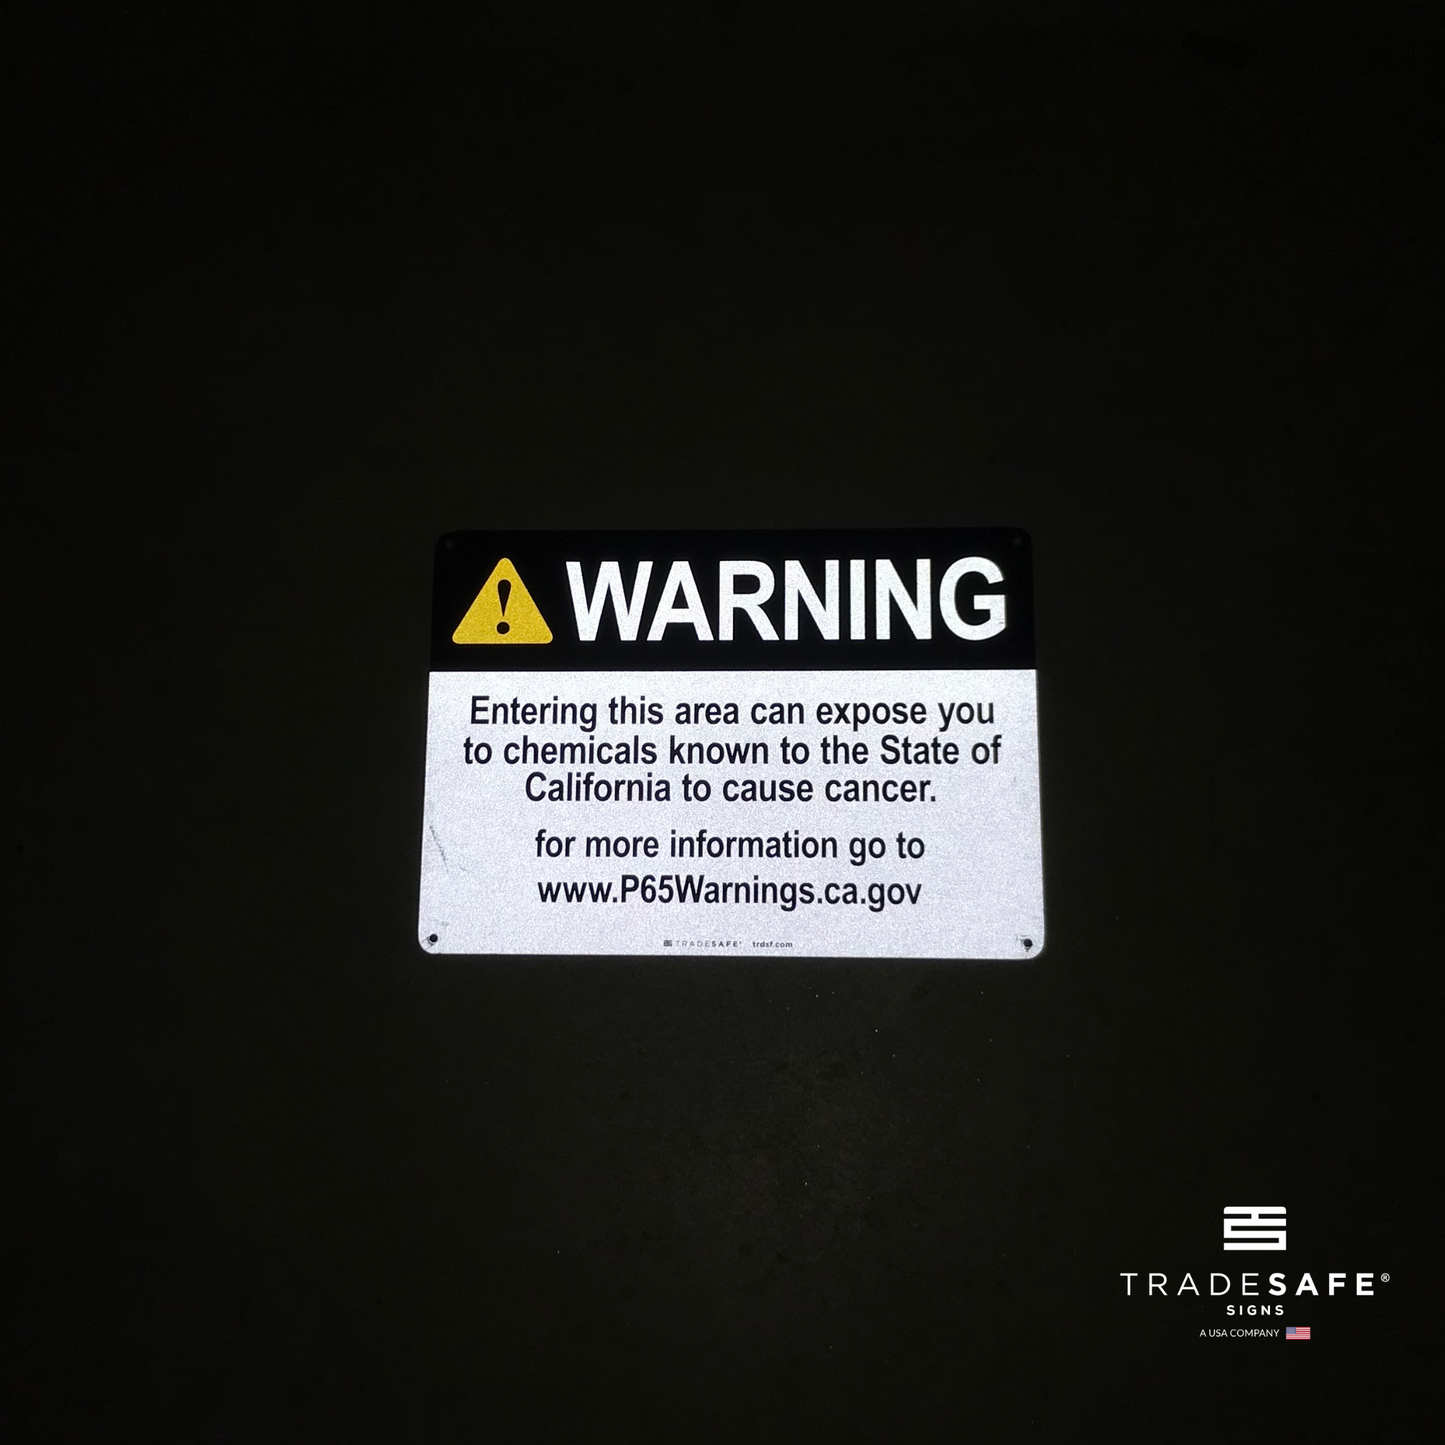 reflective attribute of warning sign on black background